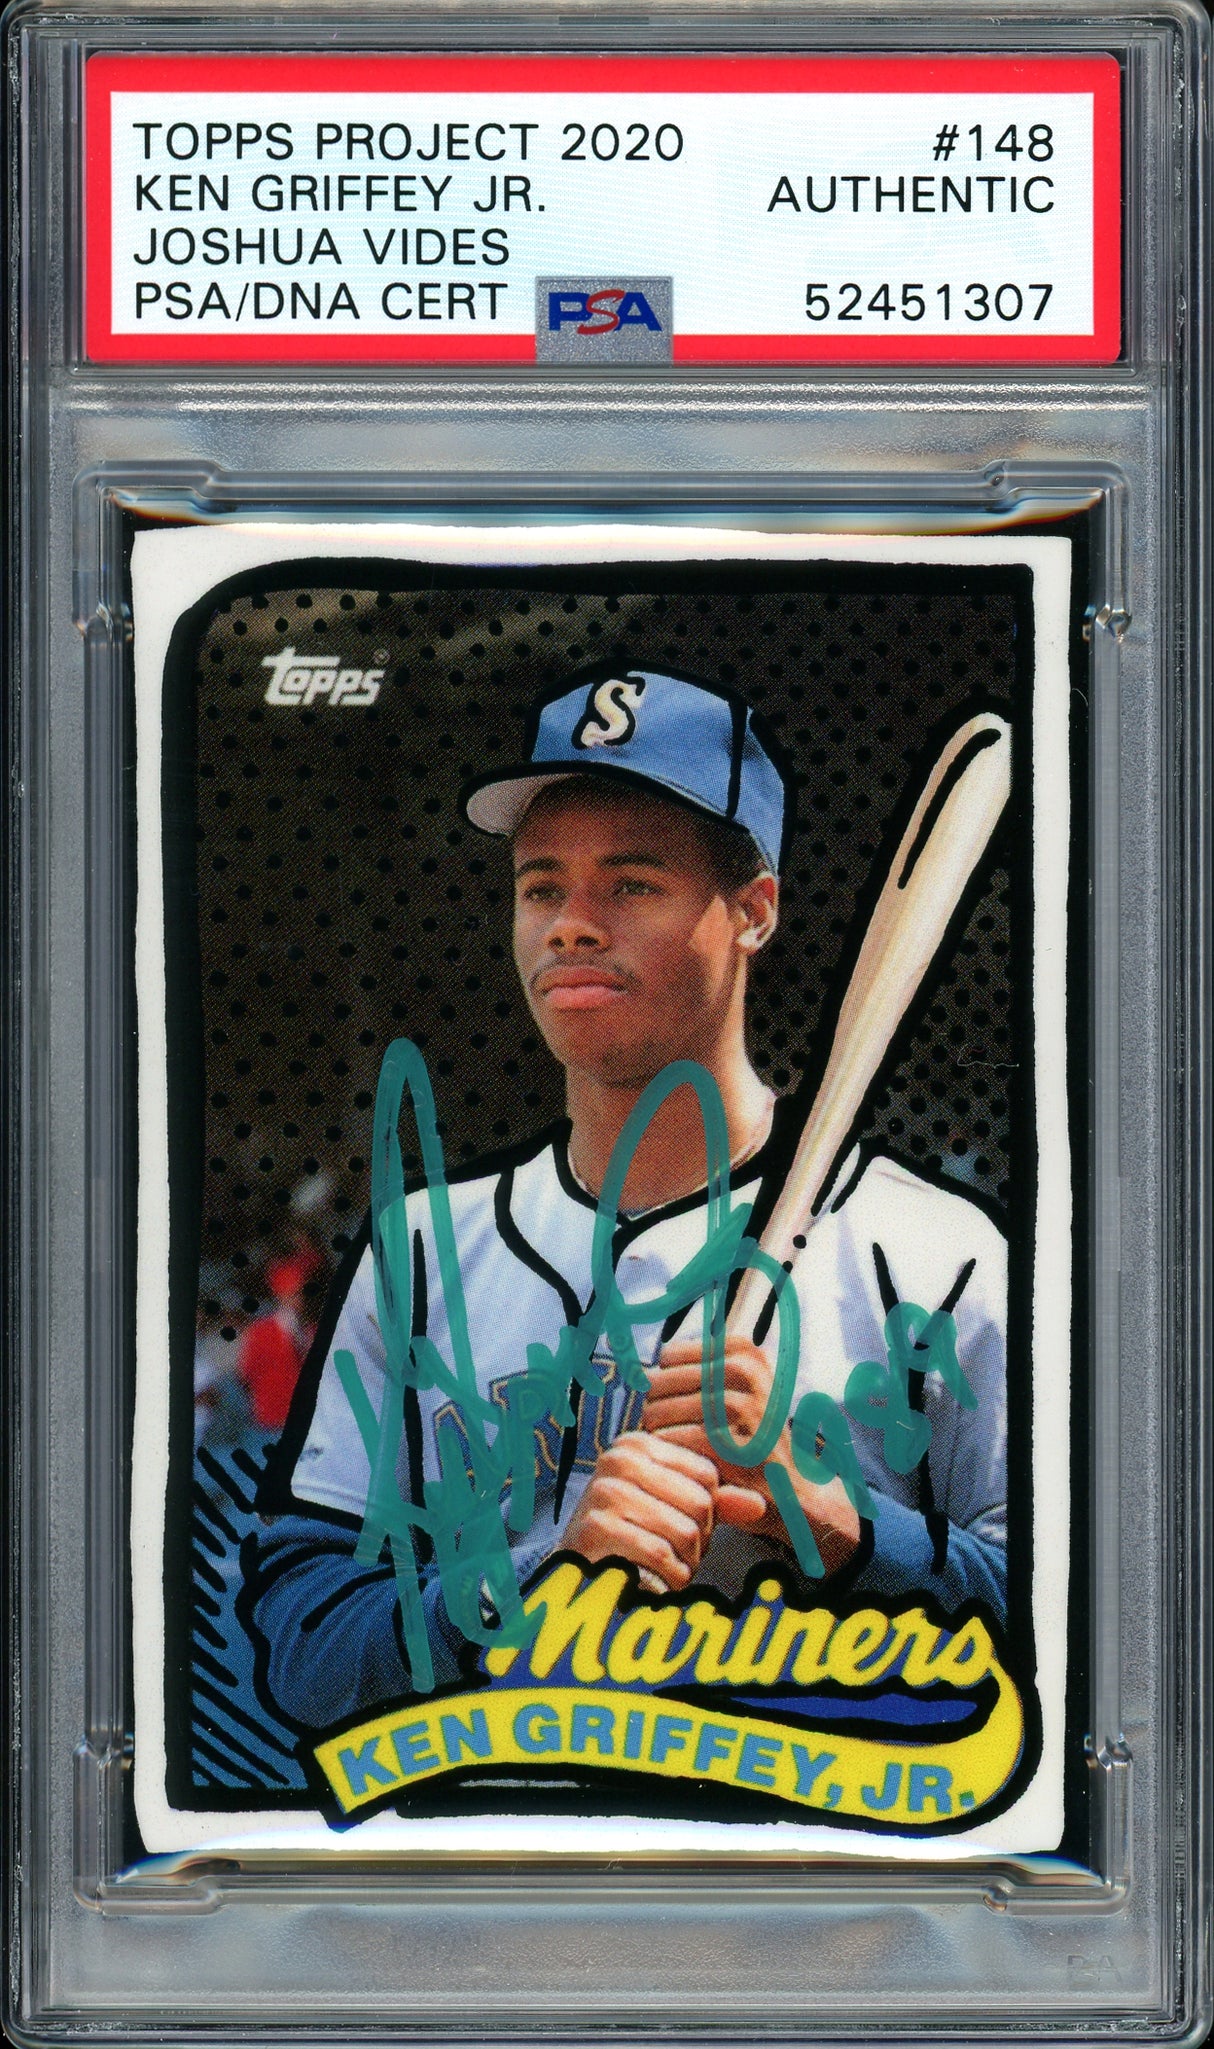 Ken Griffey Jr. Autographed Topps Project 2020 Joshua Vides Card #148 Seattle Mariners "1989" #1/1 PSA/DNA #52451307